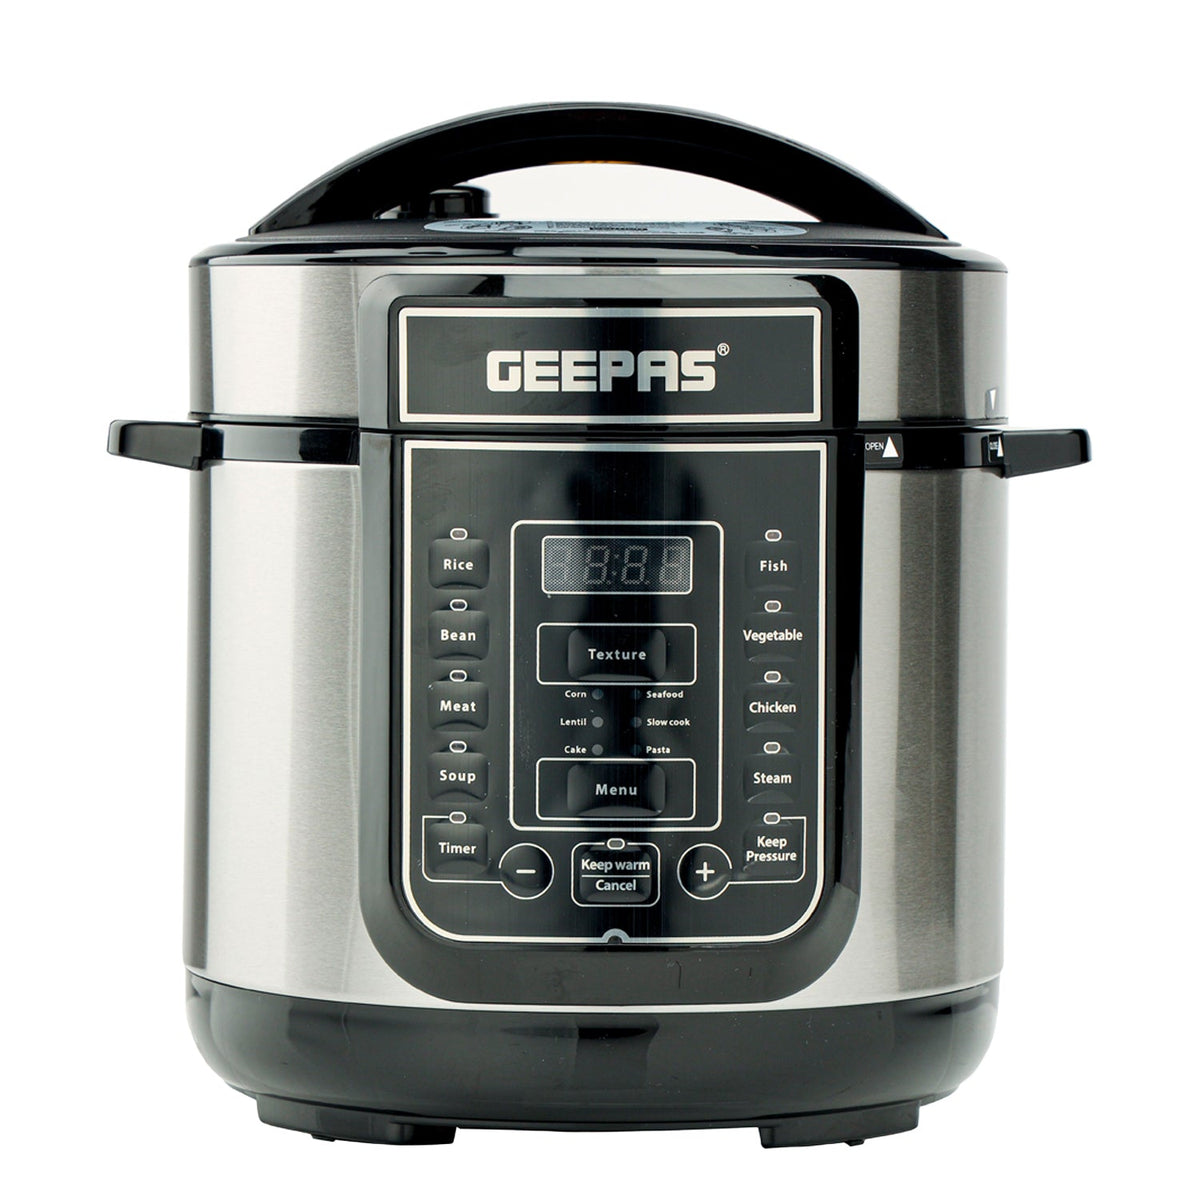 1000W Electric Multi Cooker Pressure Cooker, Steamer Multicooker Geepas | For you. For life. 